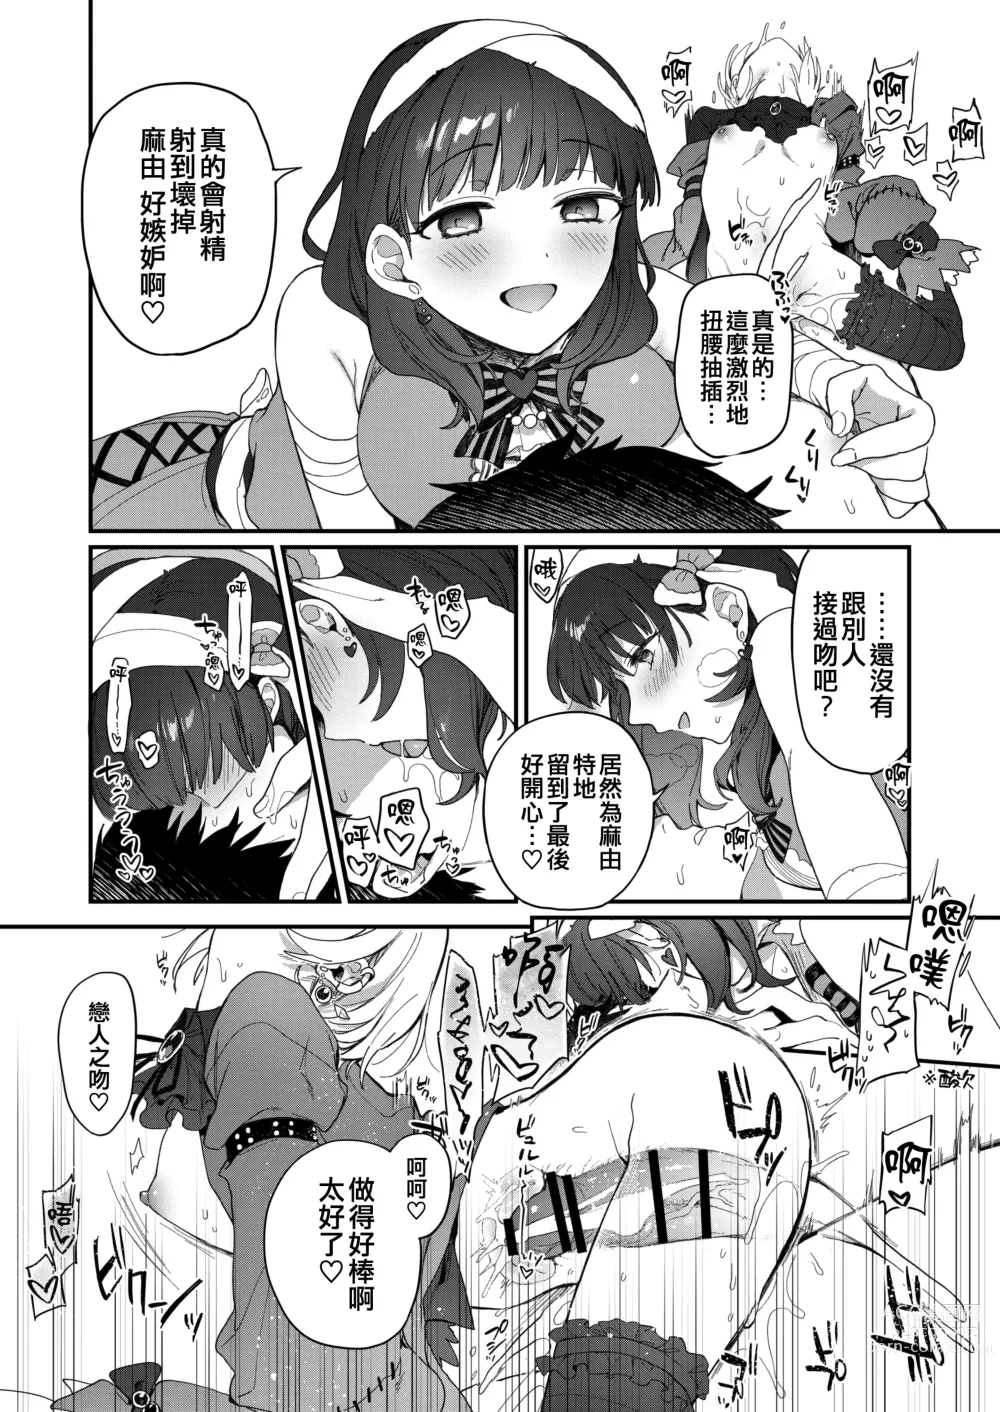 Page 36 of doujinshi Harem Halloween Party